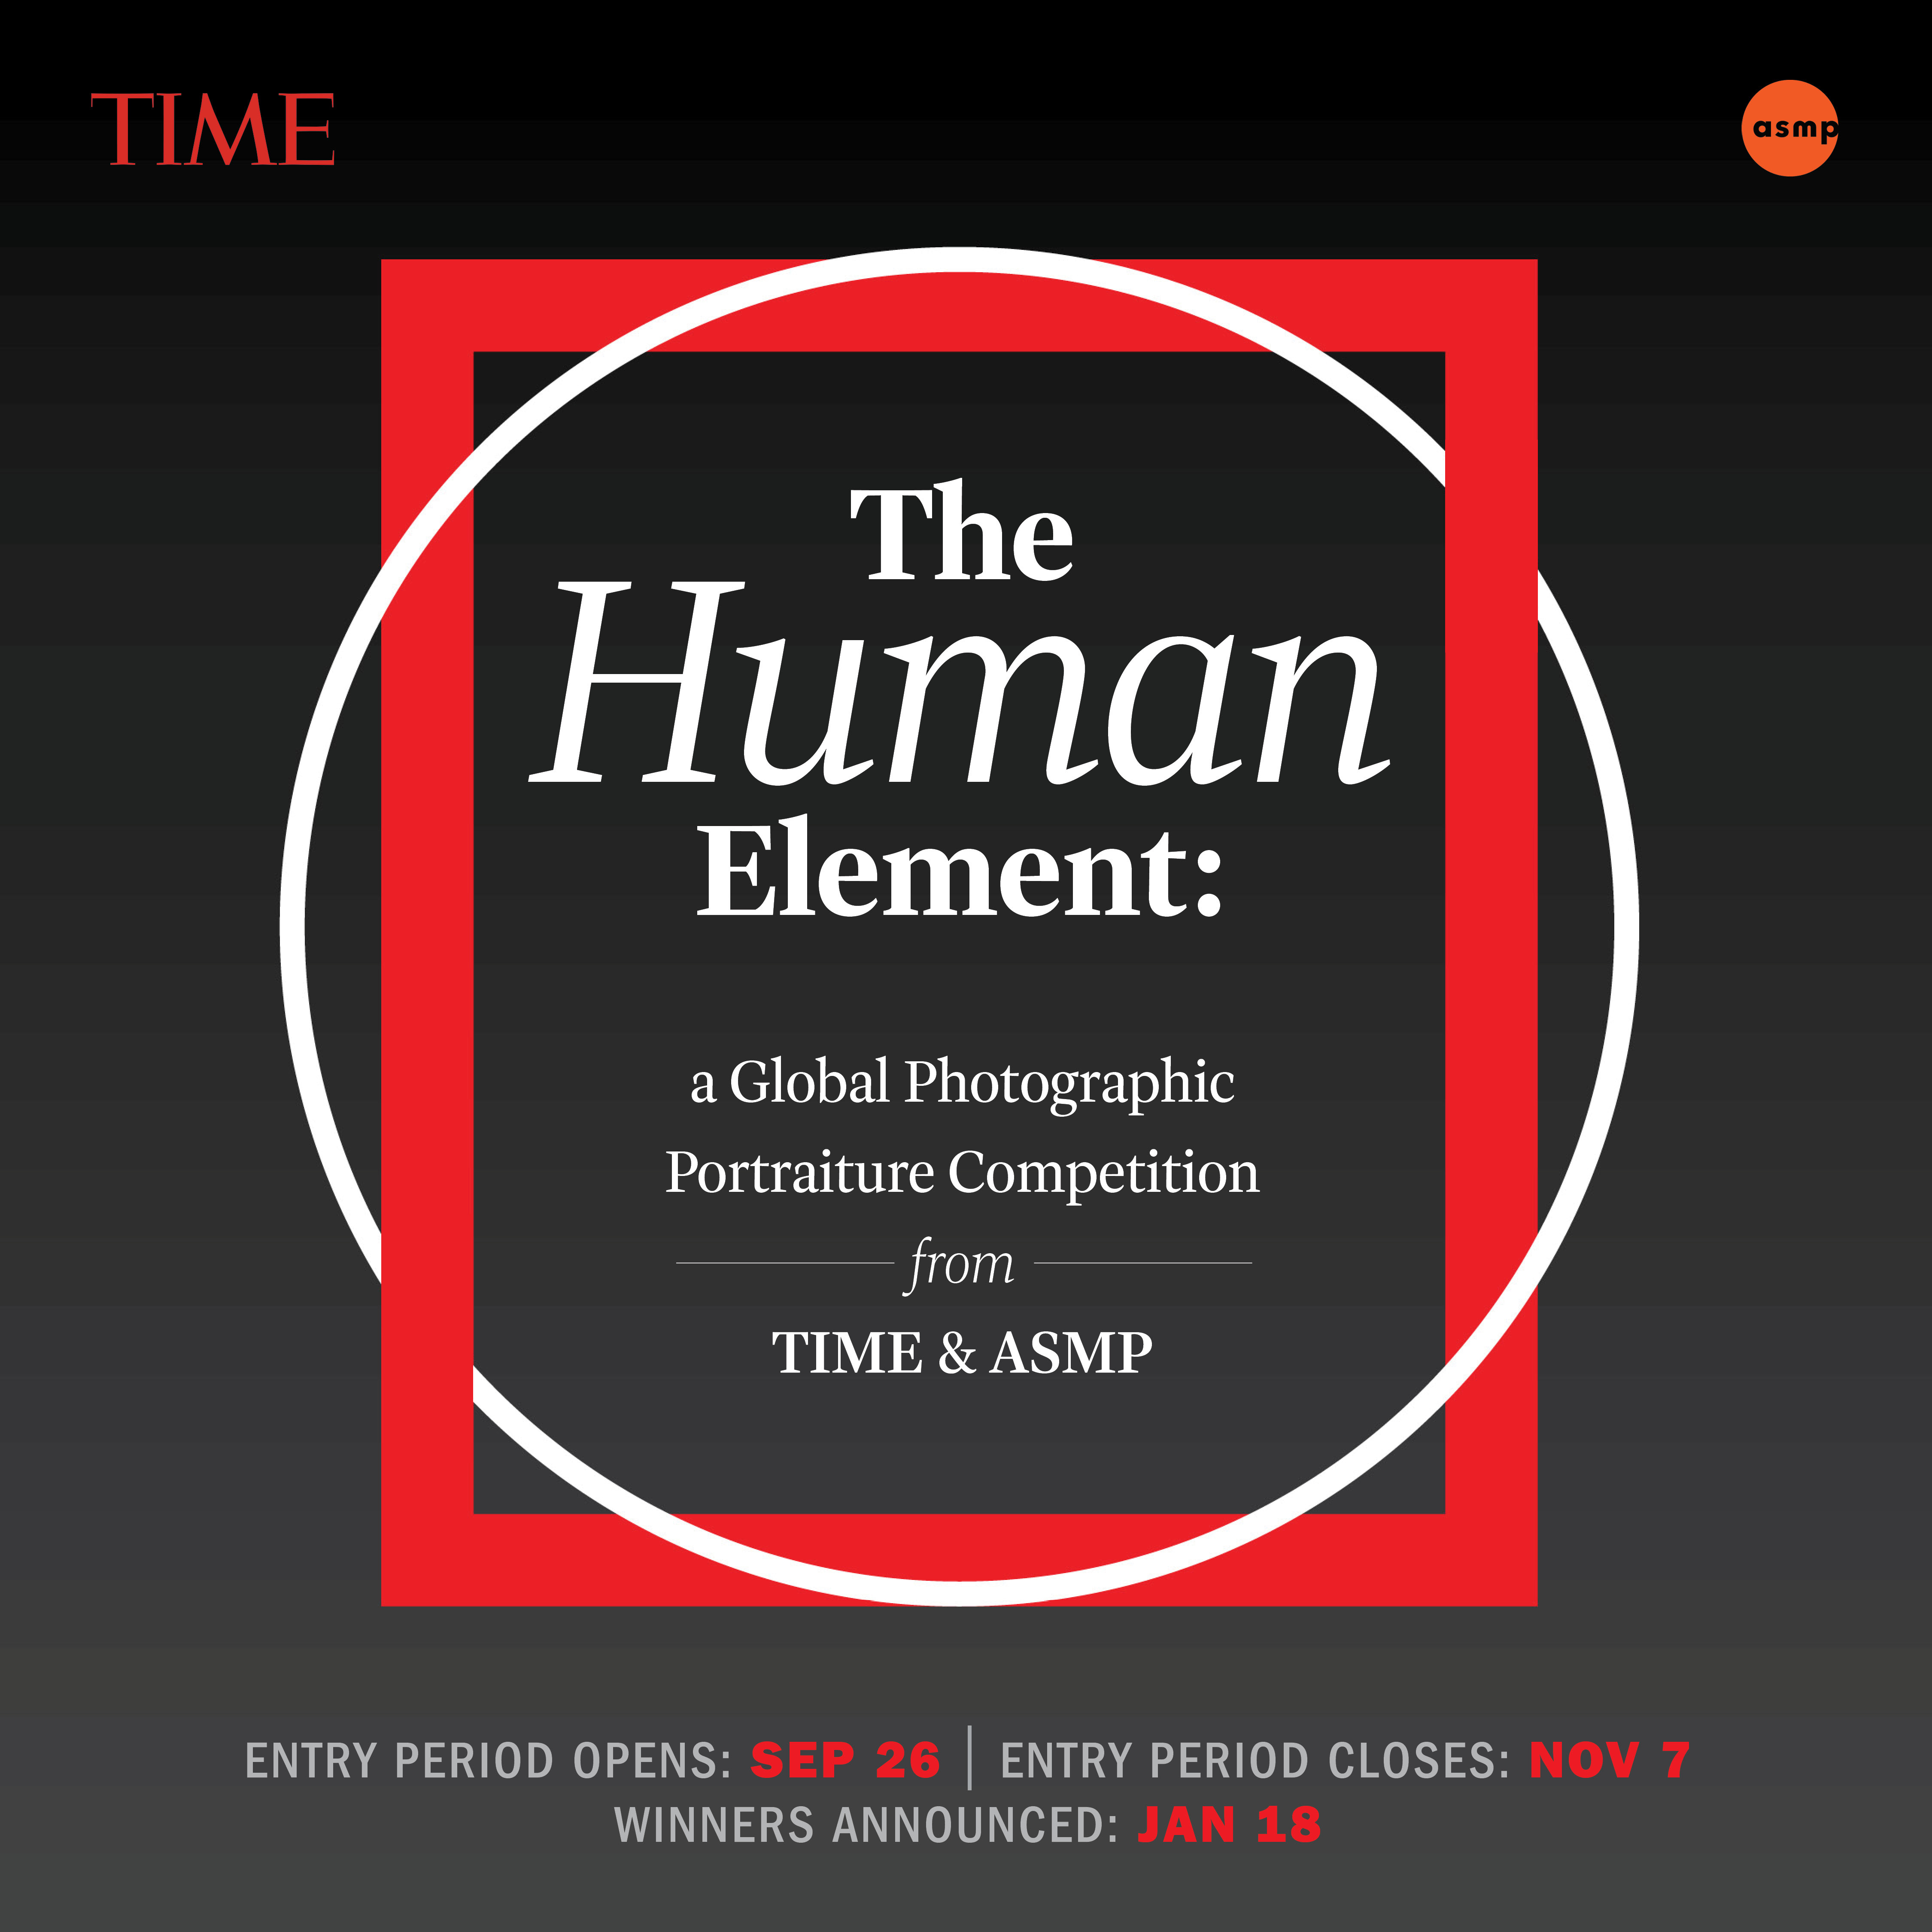 TIME and the American Society of Media Photographers Launch Global Photographic Portraiture Competition: “The Human Element”